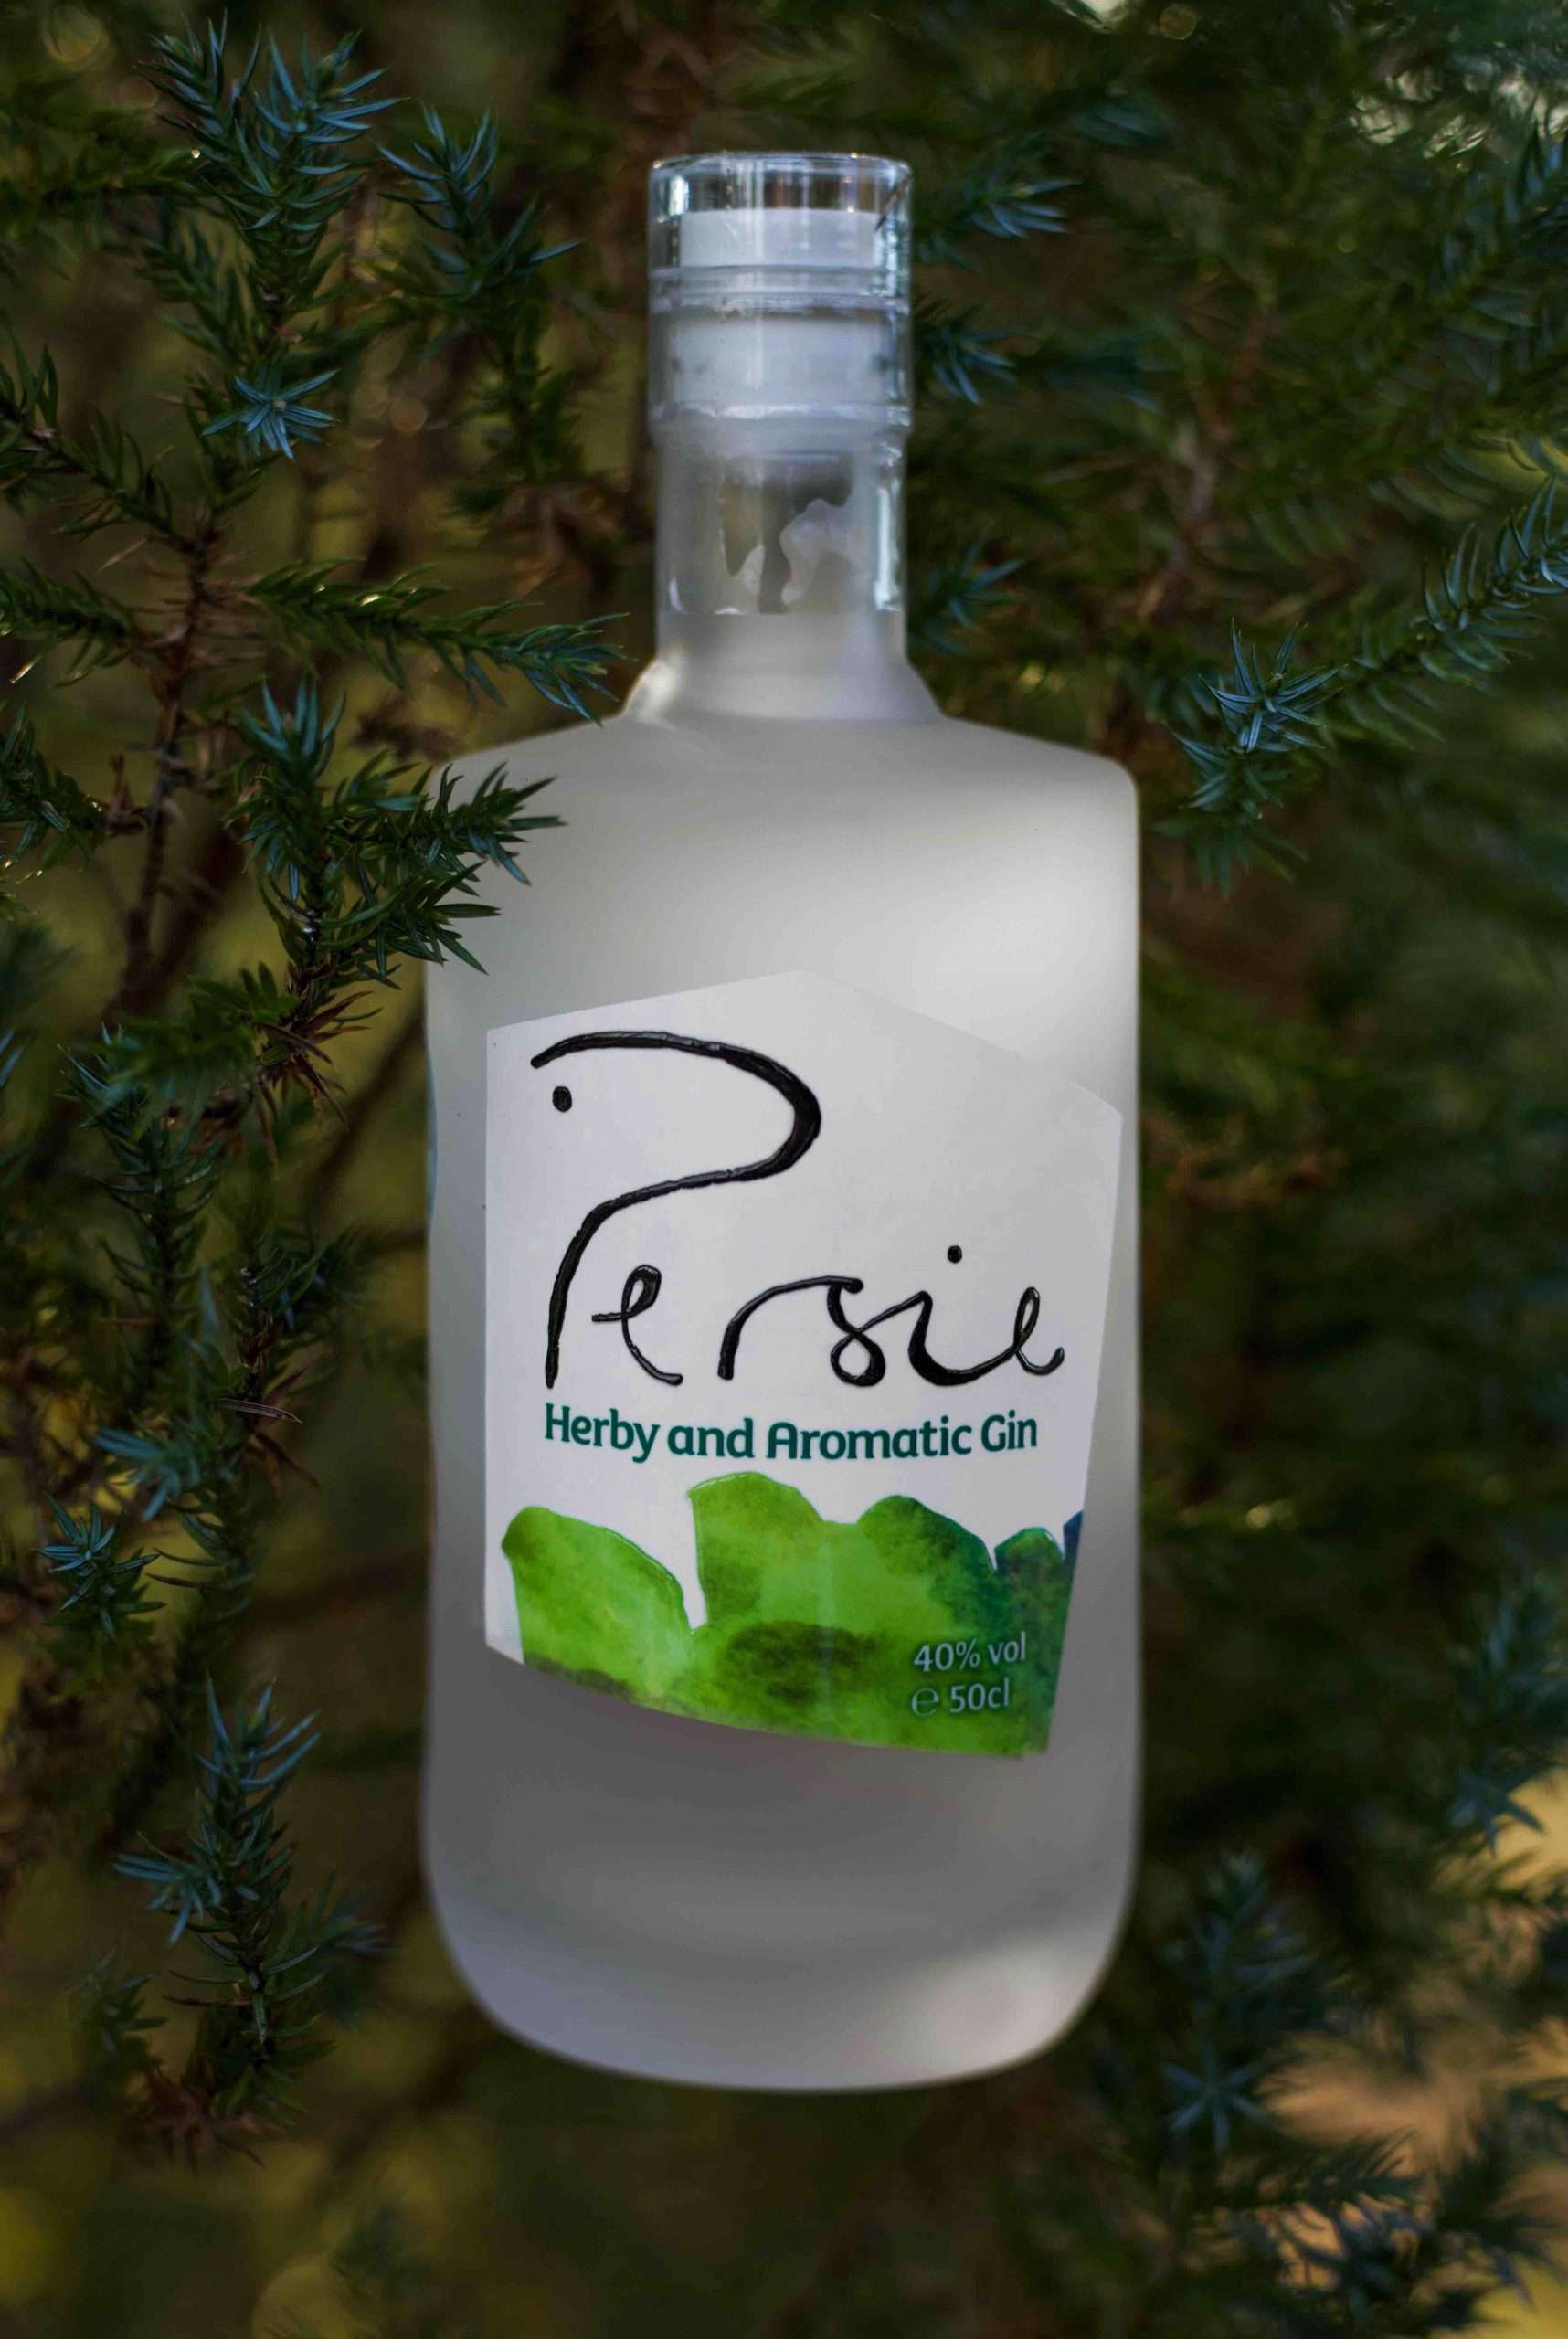 Persie Herby Aromatic Gin